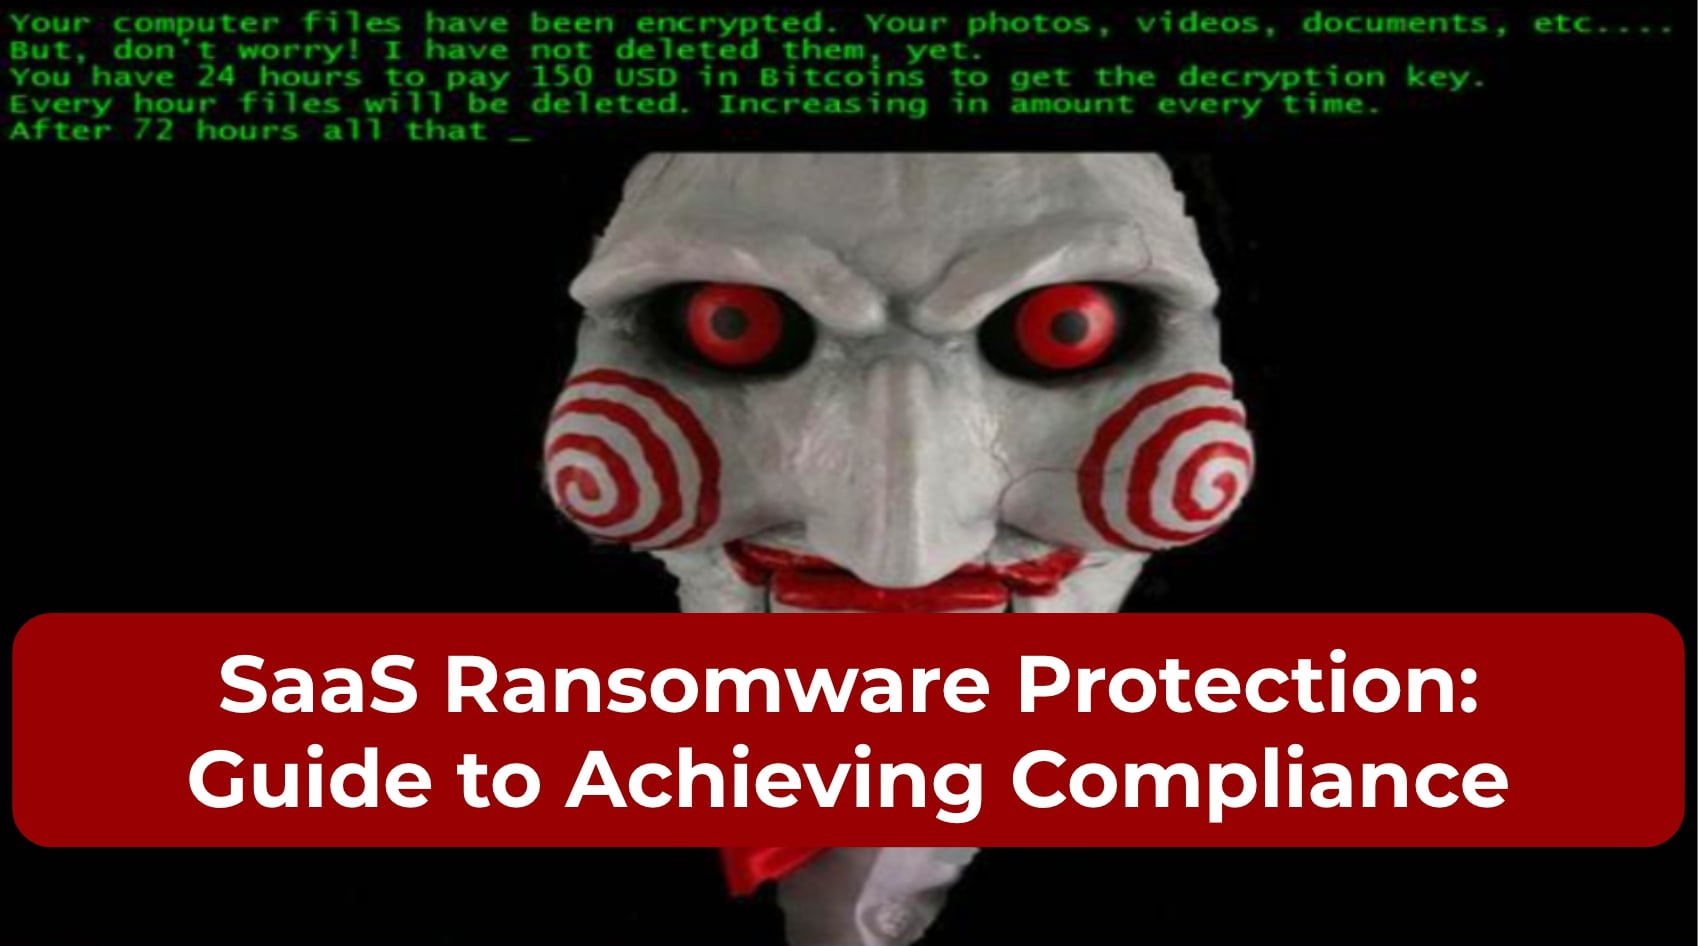 SaaS Ransomware Protection: Guide to Achieving Compliance